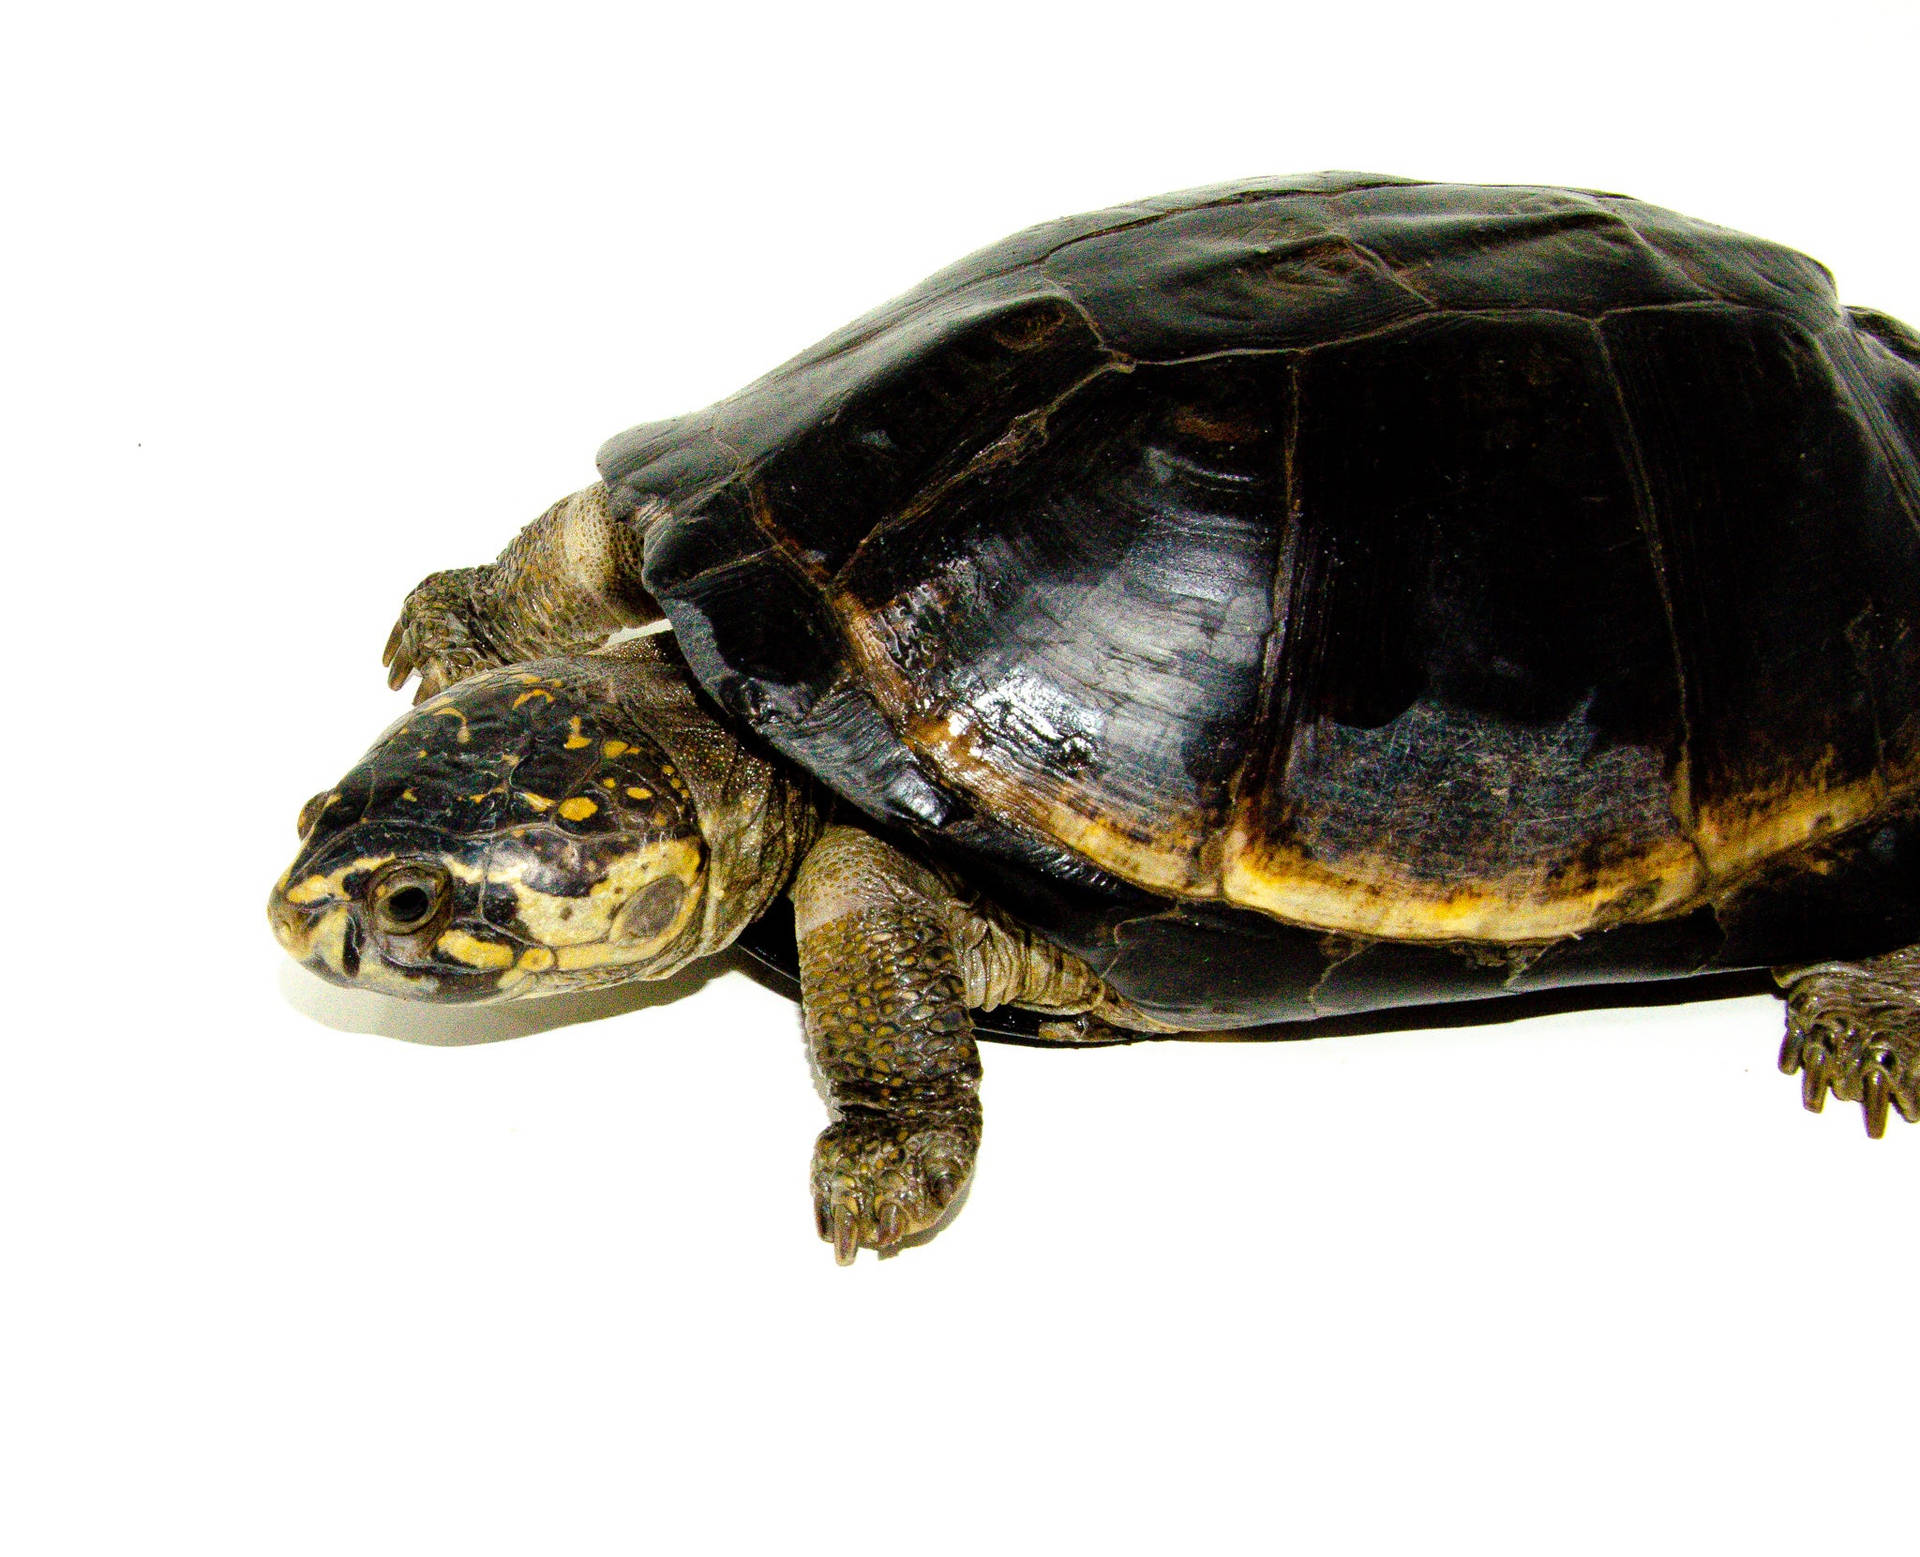 Download Mud Turtle With A Two-tone Shell Wallpaper | Wallpapers.com